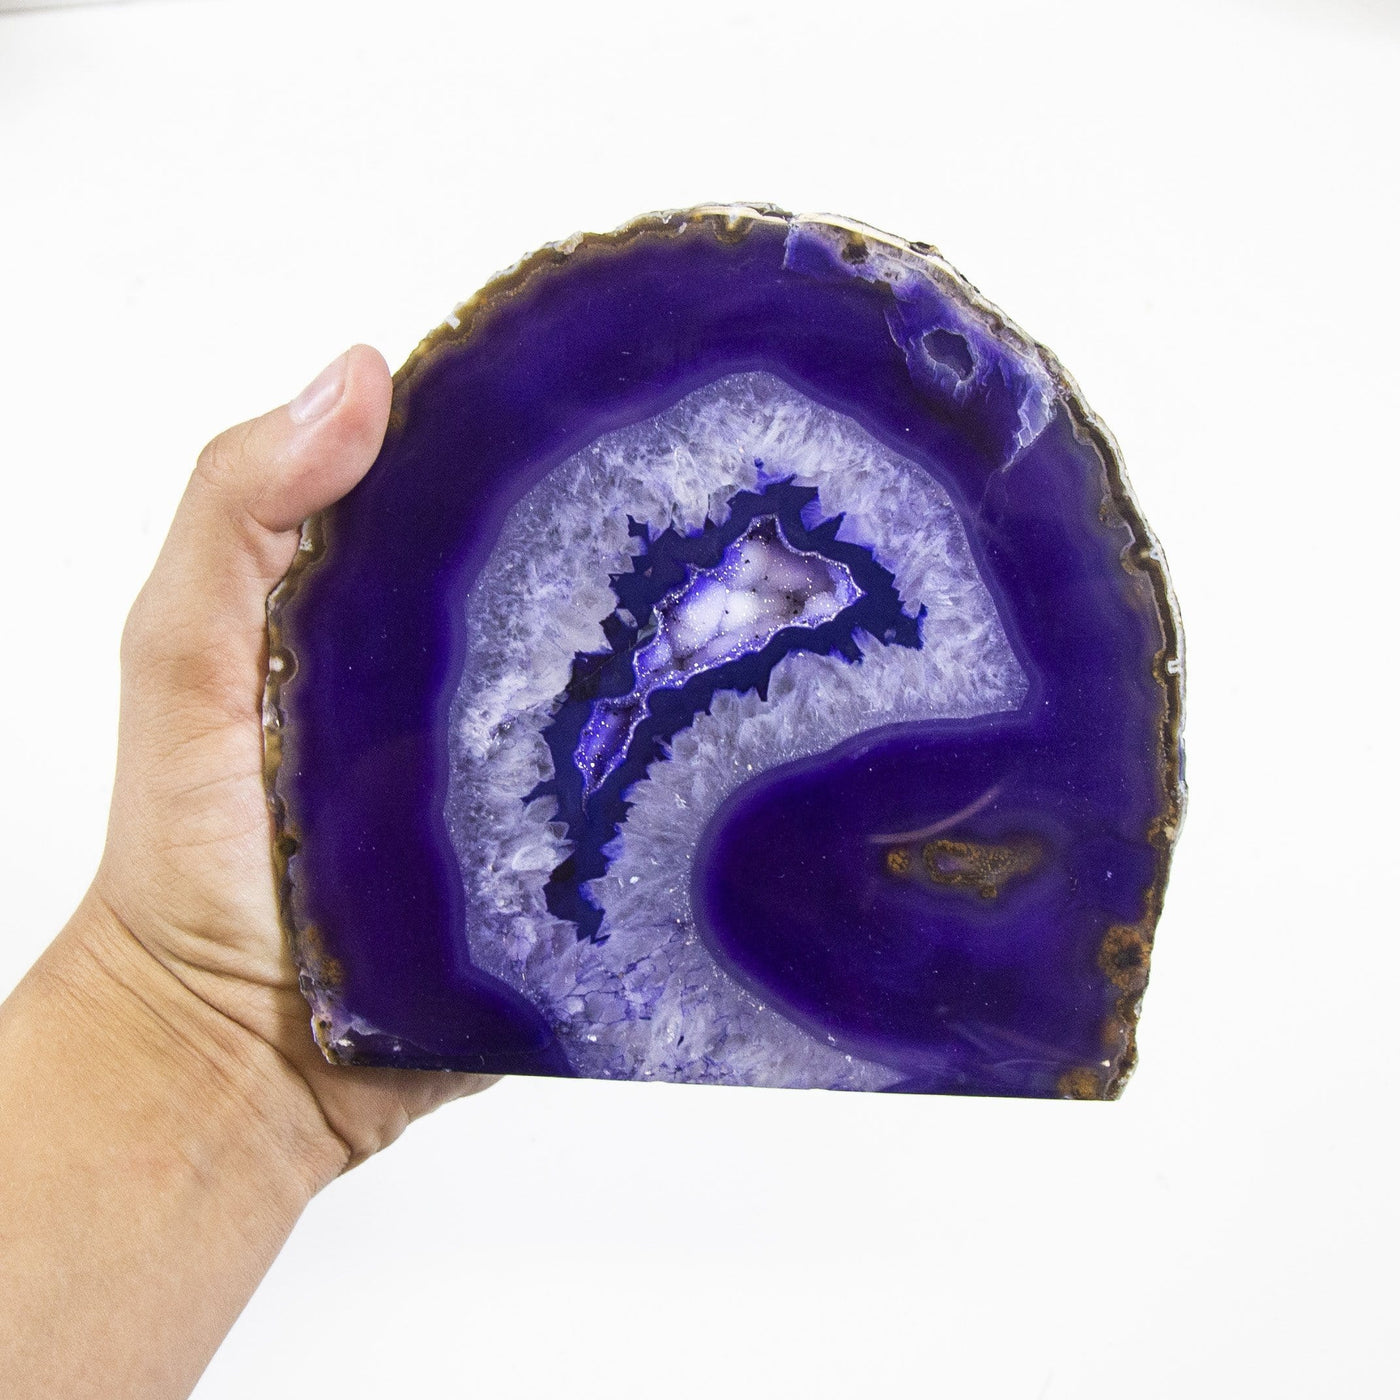 One purple Agate Half Geode Druzy in a hand with a white background.